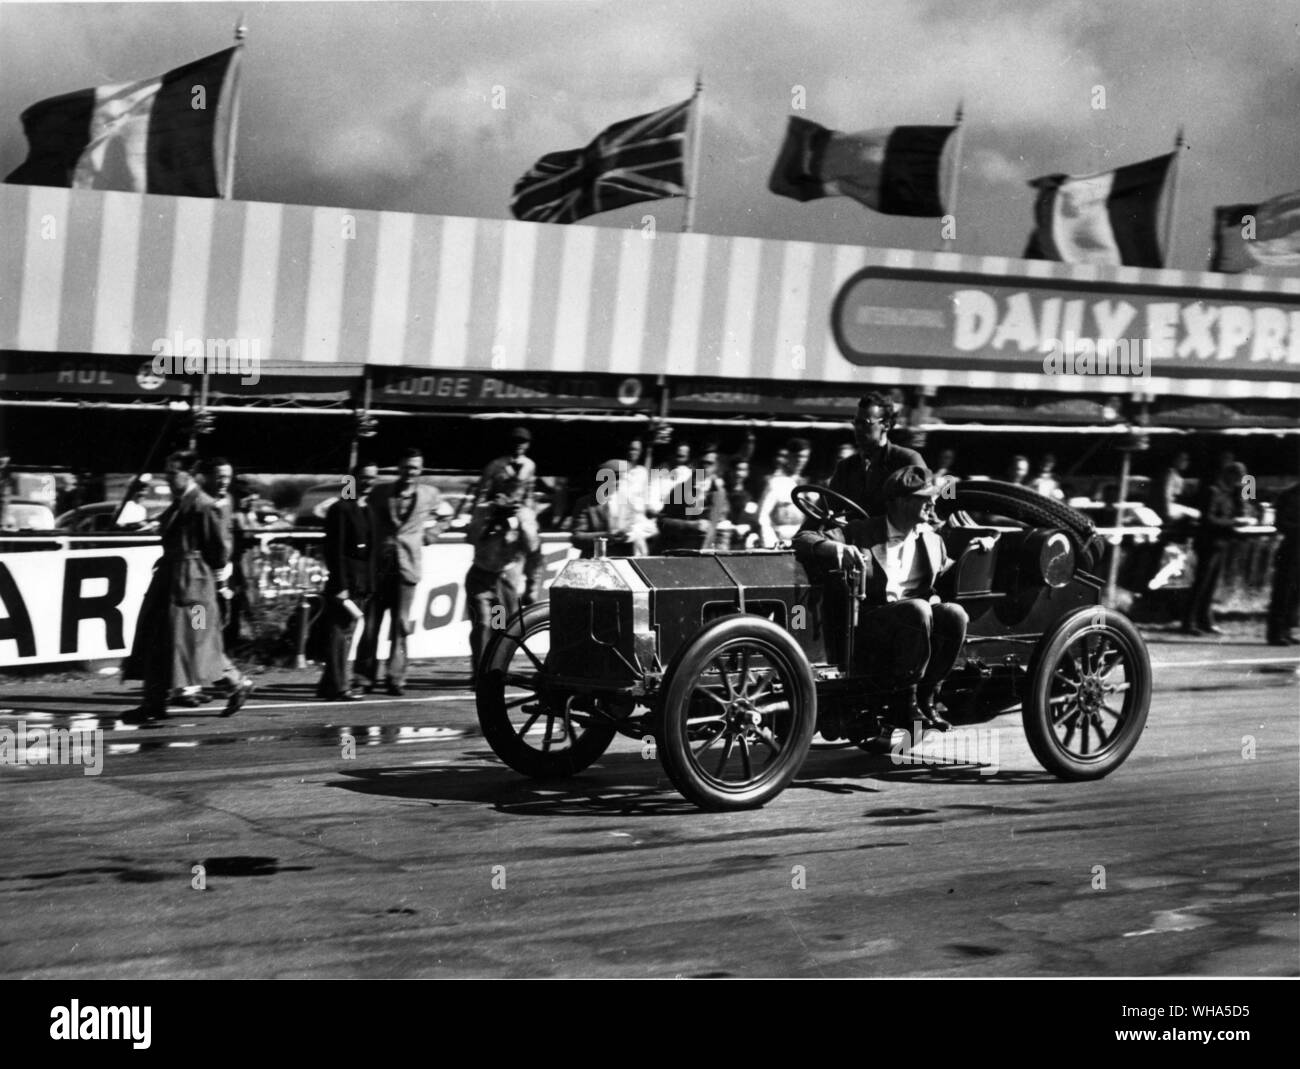 Silverstone. International Trophy Meeting 29th August 1950. 1903 Gordon Bennett Napier driven by R Barker in the commemoration of veteran racing and sports cars.. Stock Photo